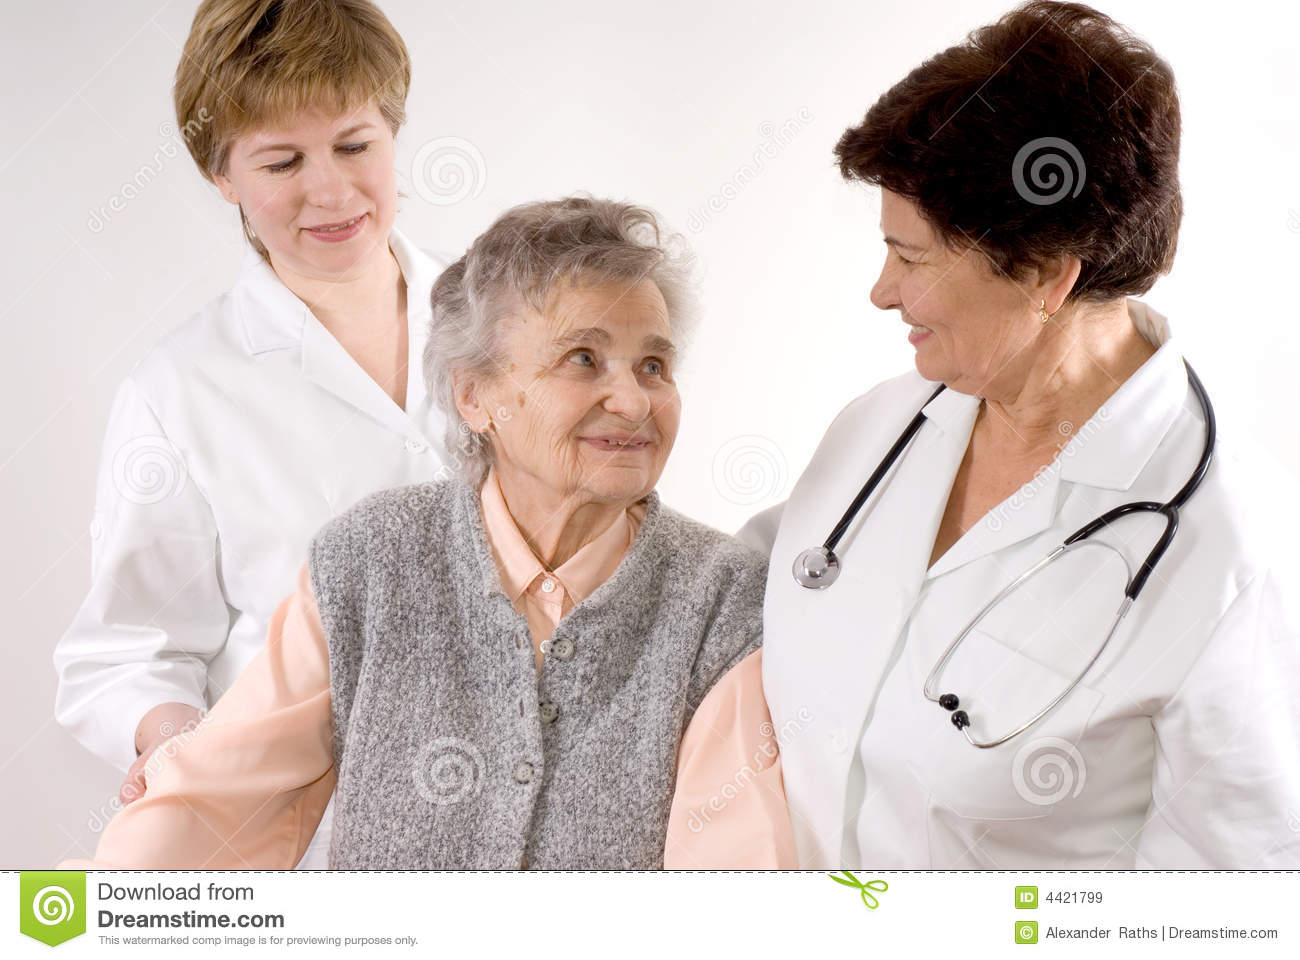 Health Care Workers Royalty Free Stock Images   Image  4421799